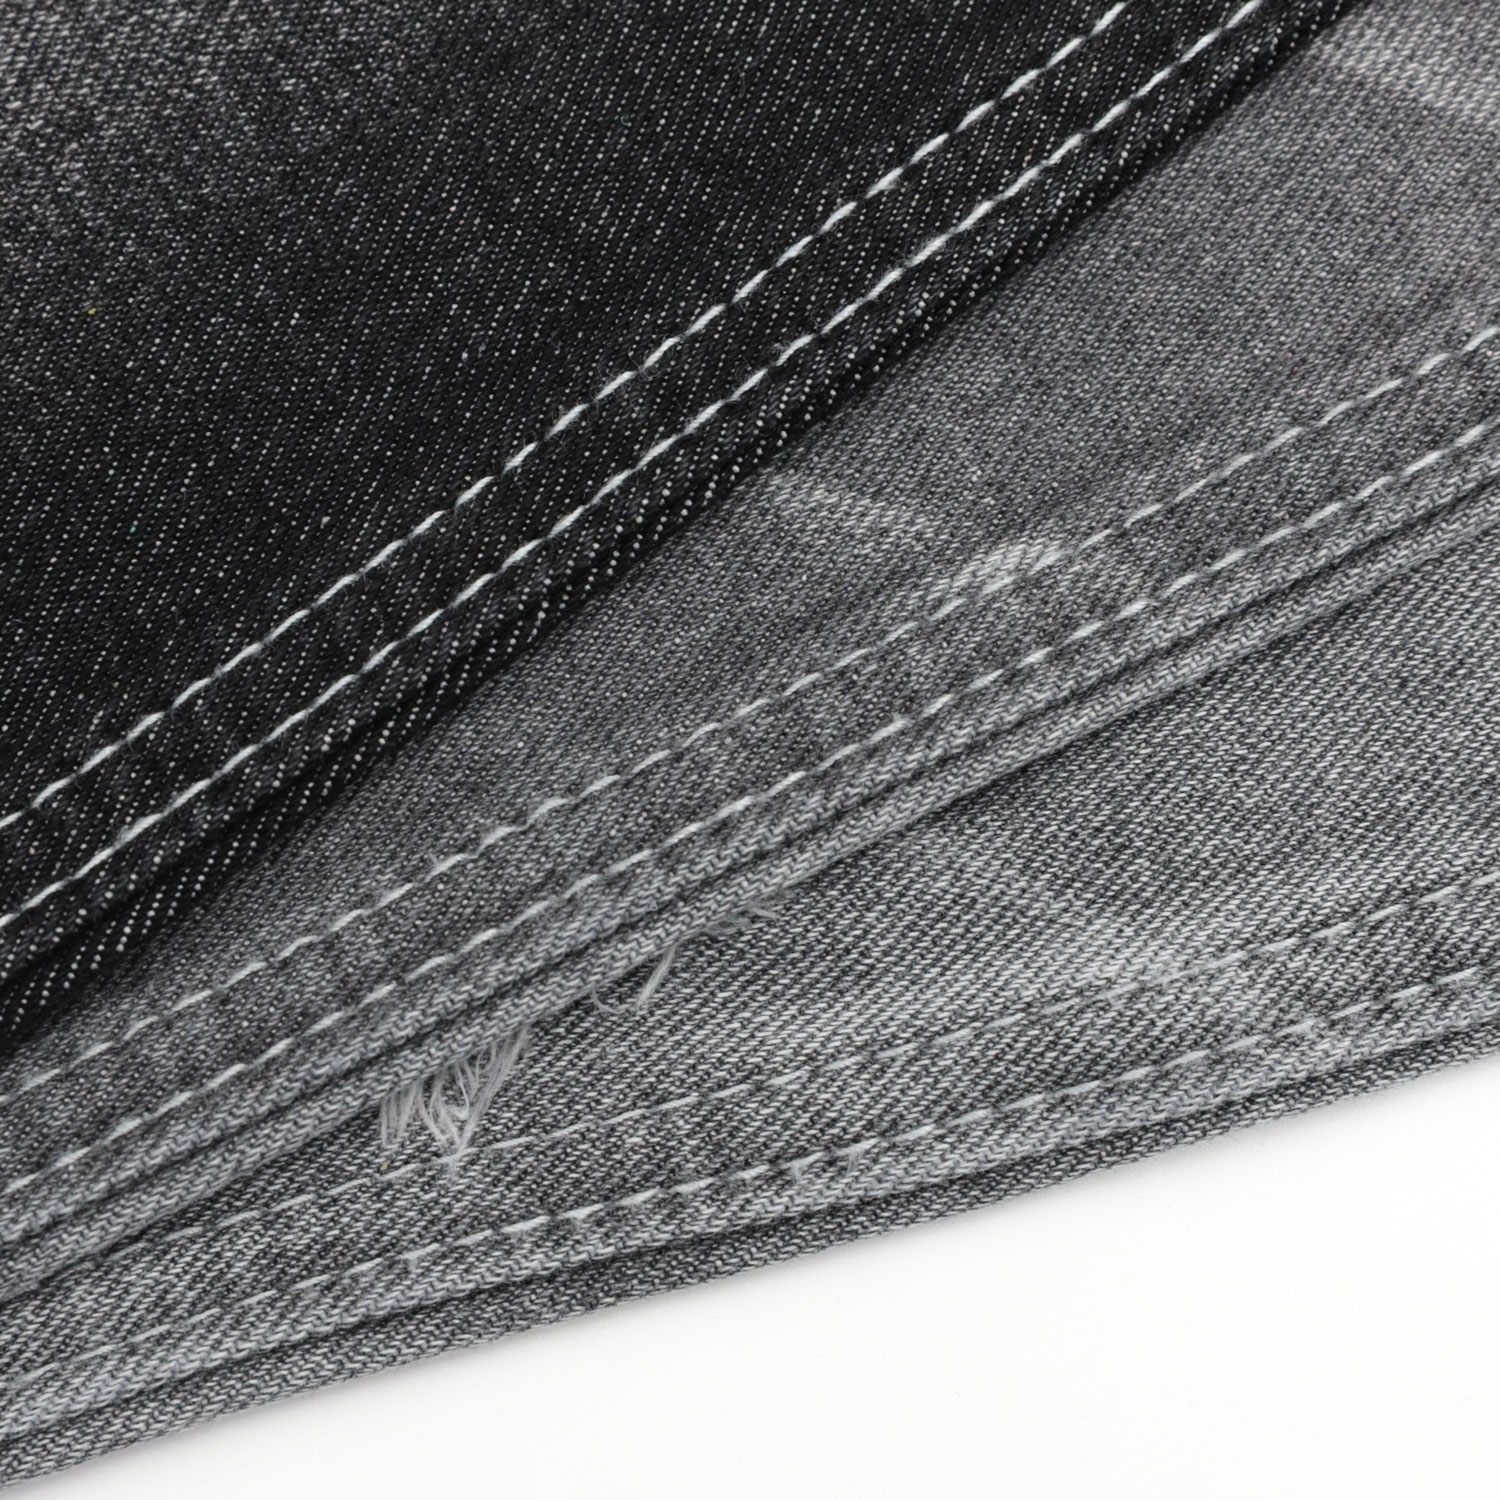 Dothing - the Perfect Jeans Fabric Material 1